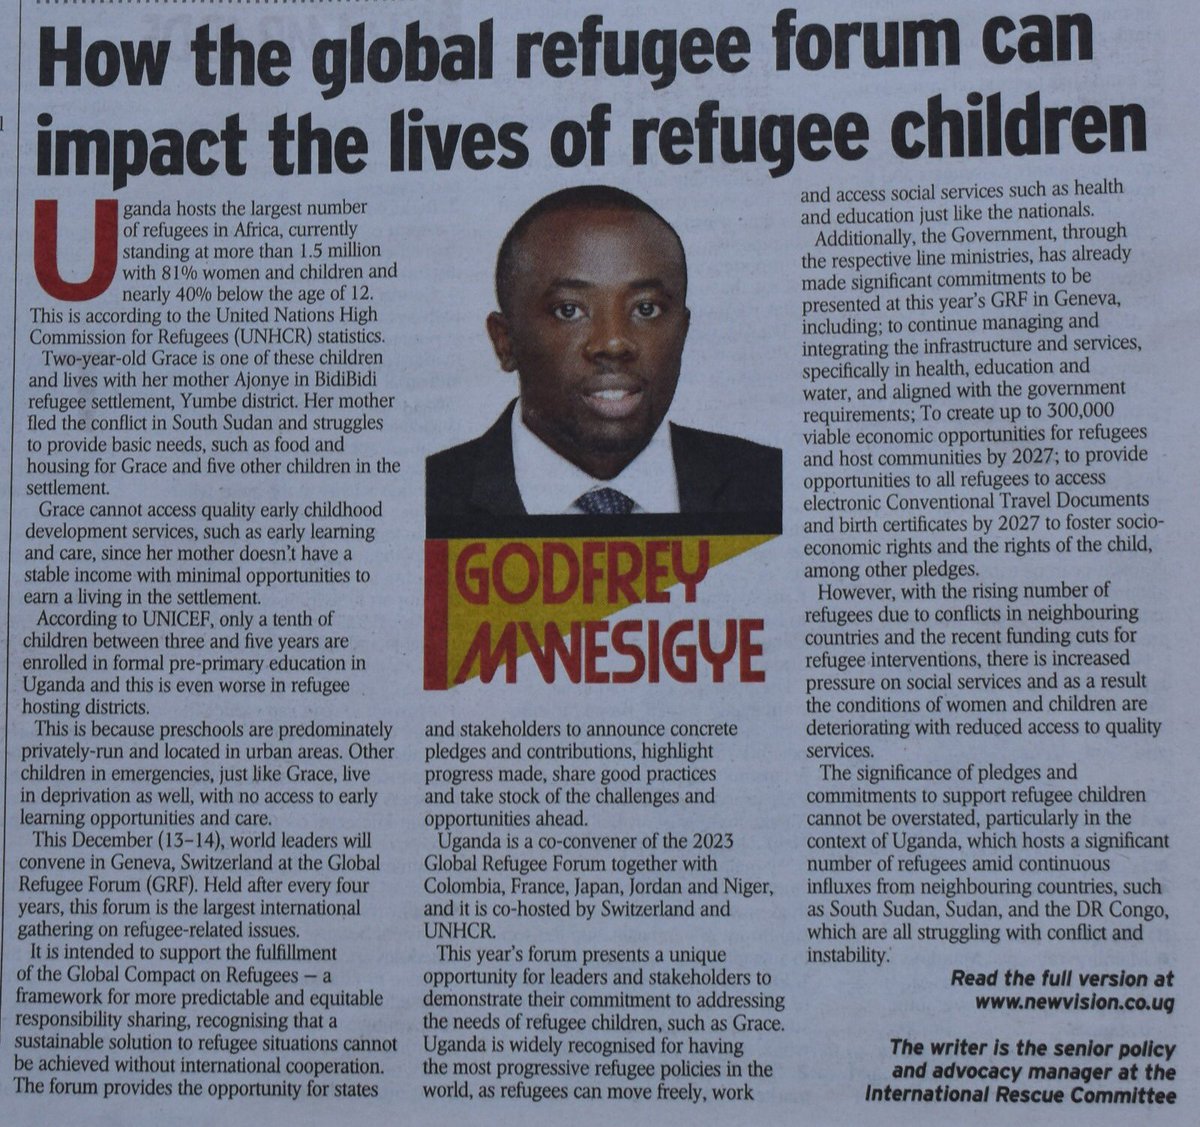 I'm happy that @newvisionwire has published my article: How the Global Refugee Forum can impact the lives of refugee children.

The #GRF2023 presents a unique opportunity for leaders & stakeholders to demonstrate their commitment to addressing the needs of refugee children.